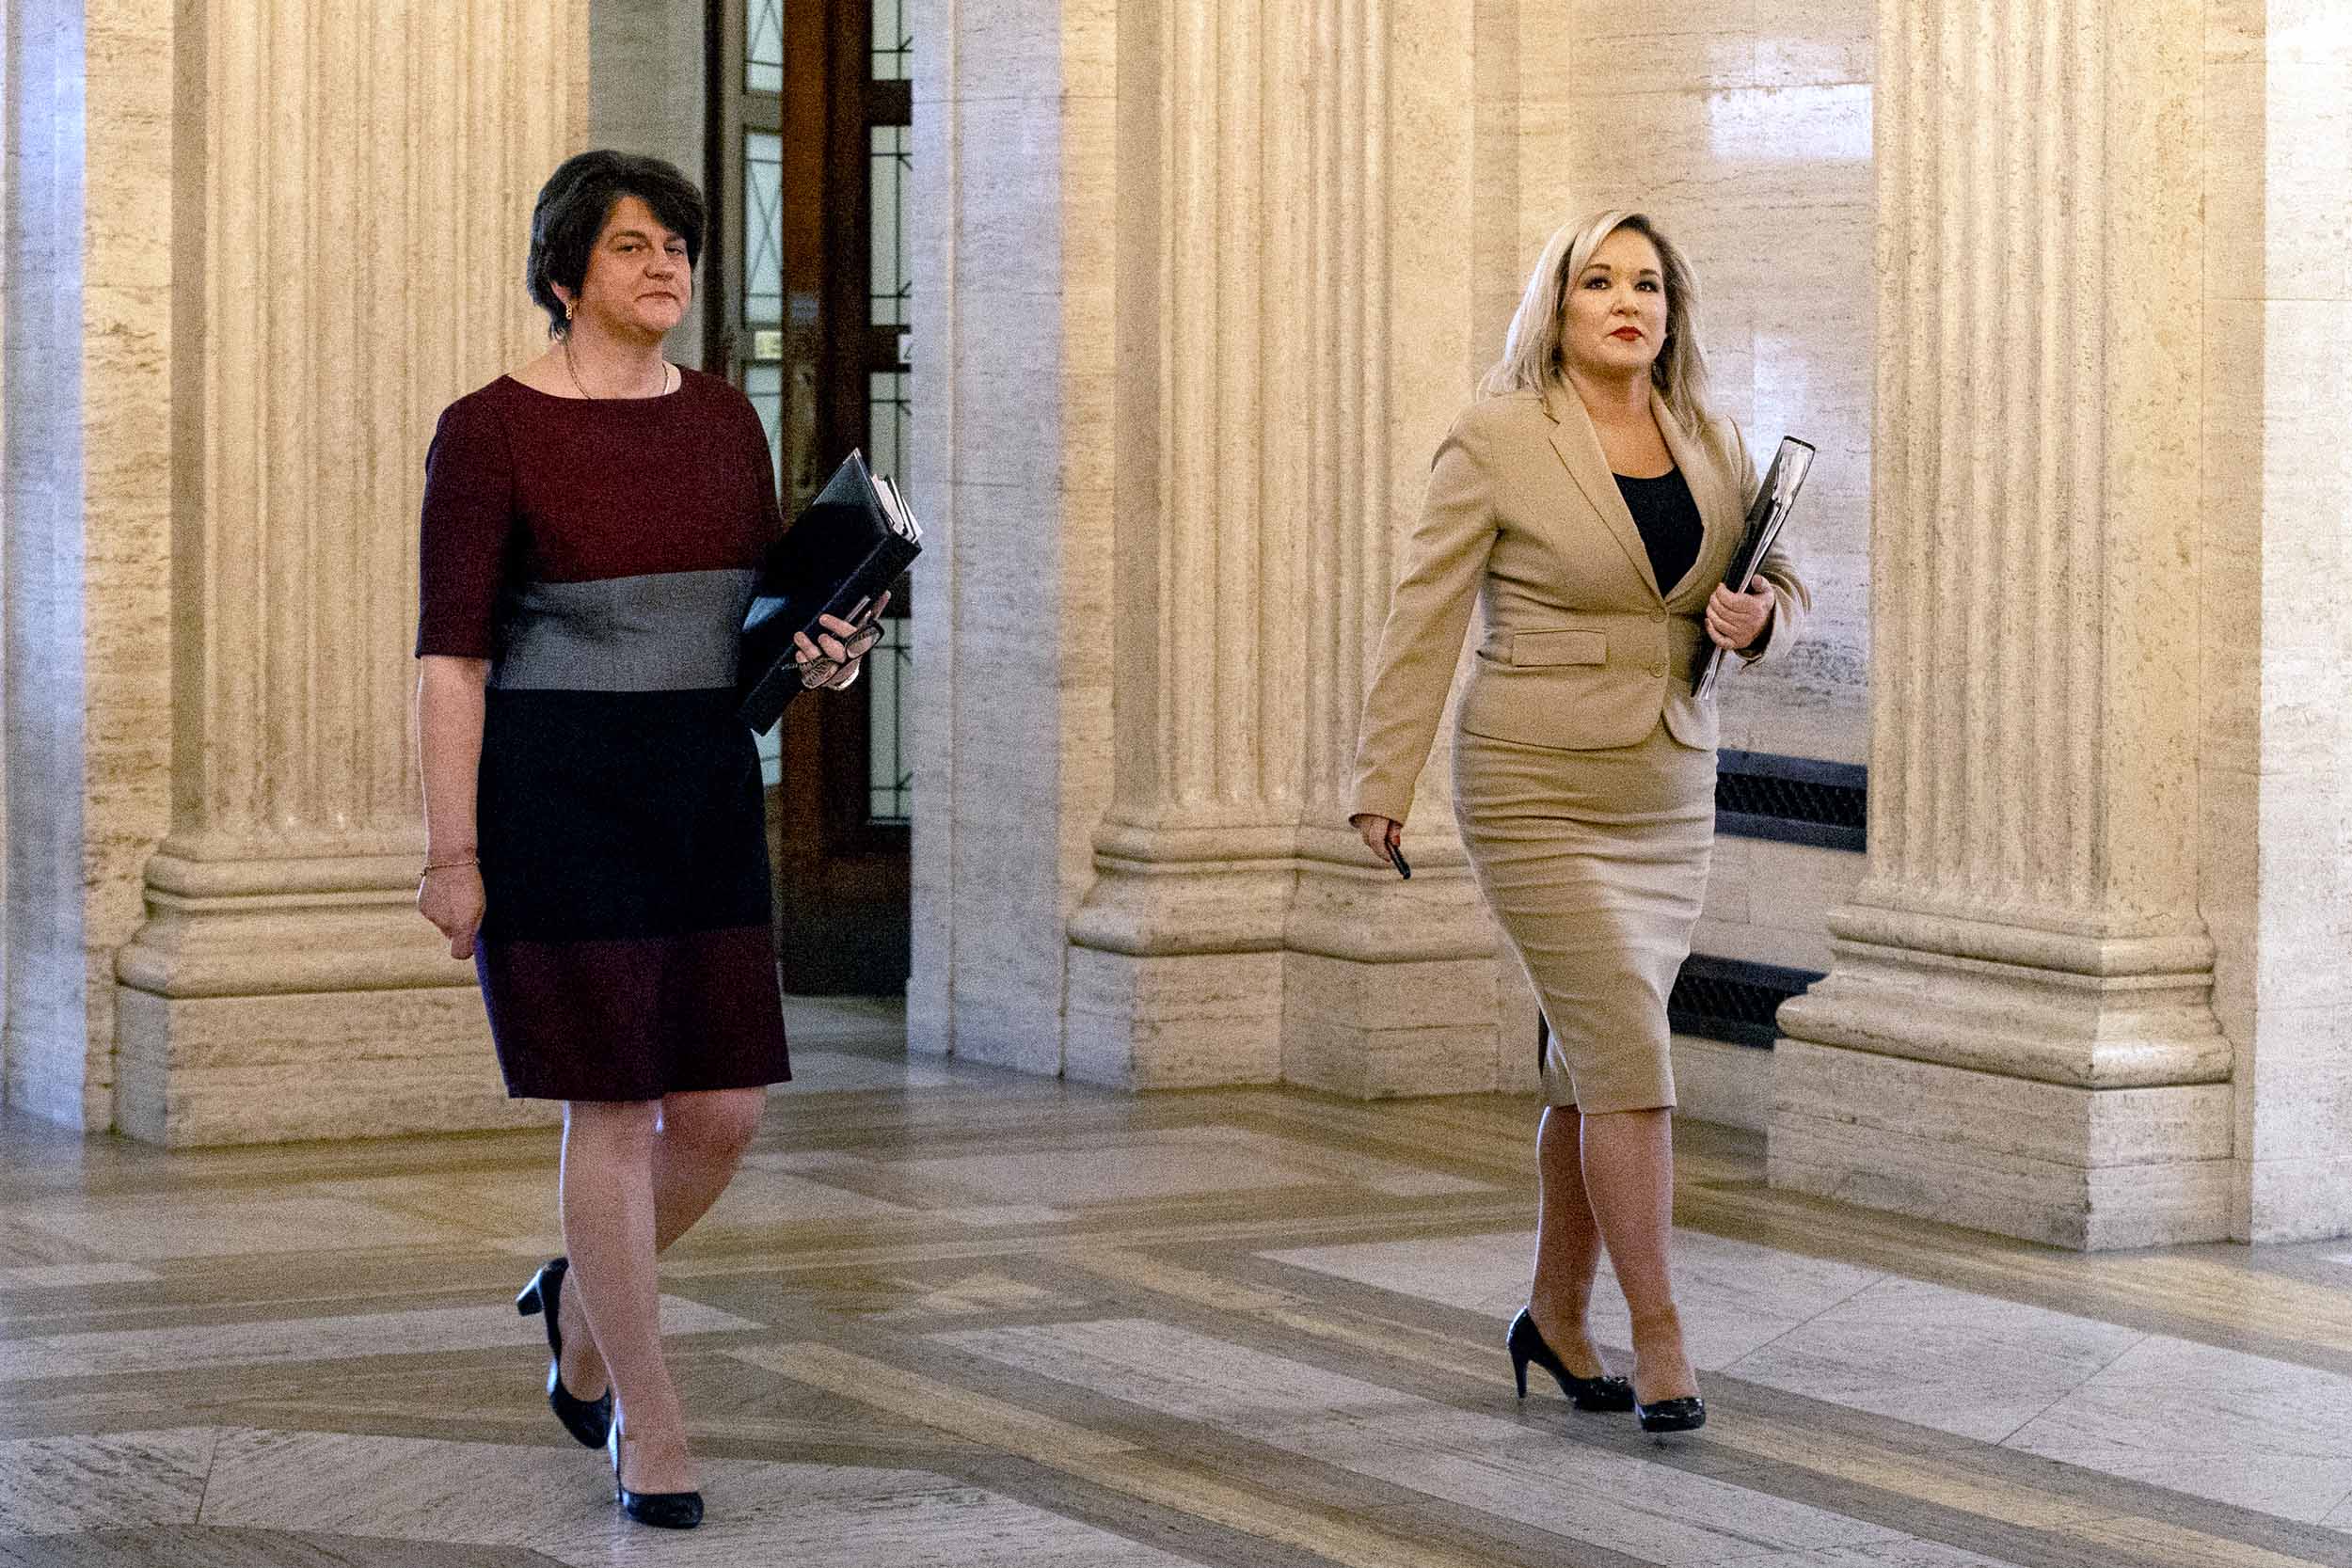 Northern Ireland's First Minister Arlene Foster, left, and Deputy First Minister Michelle O'Neill arrive at Stormont Parliament Buildings in Belfast on May 12.